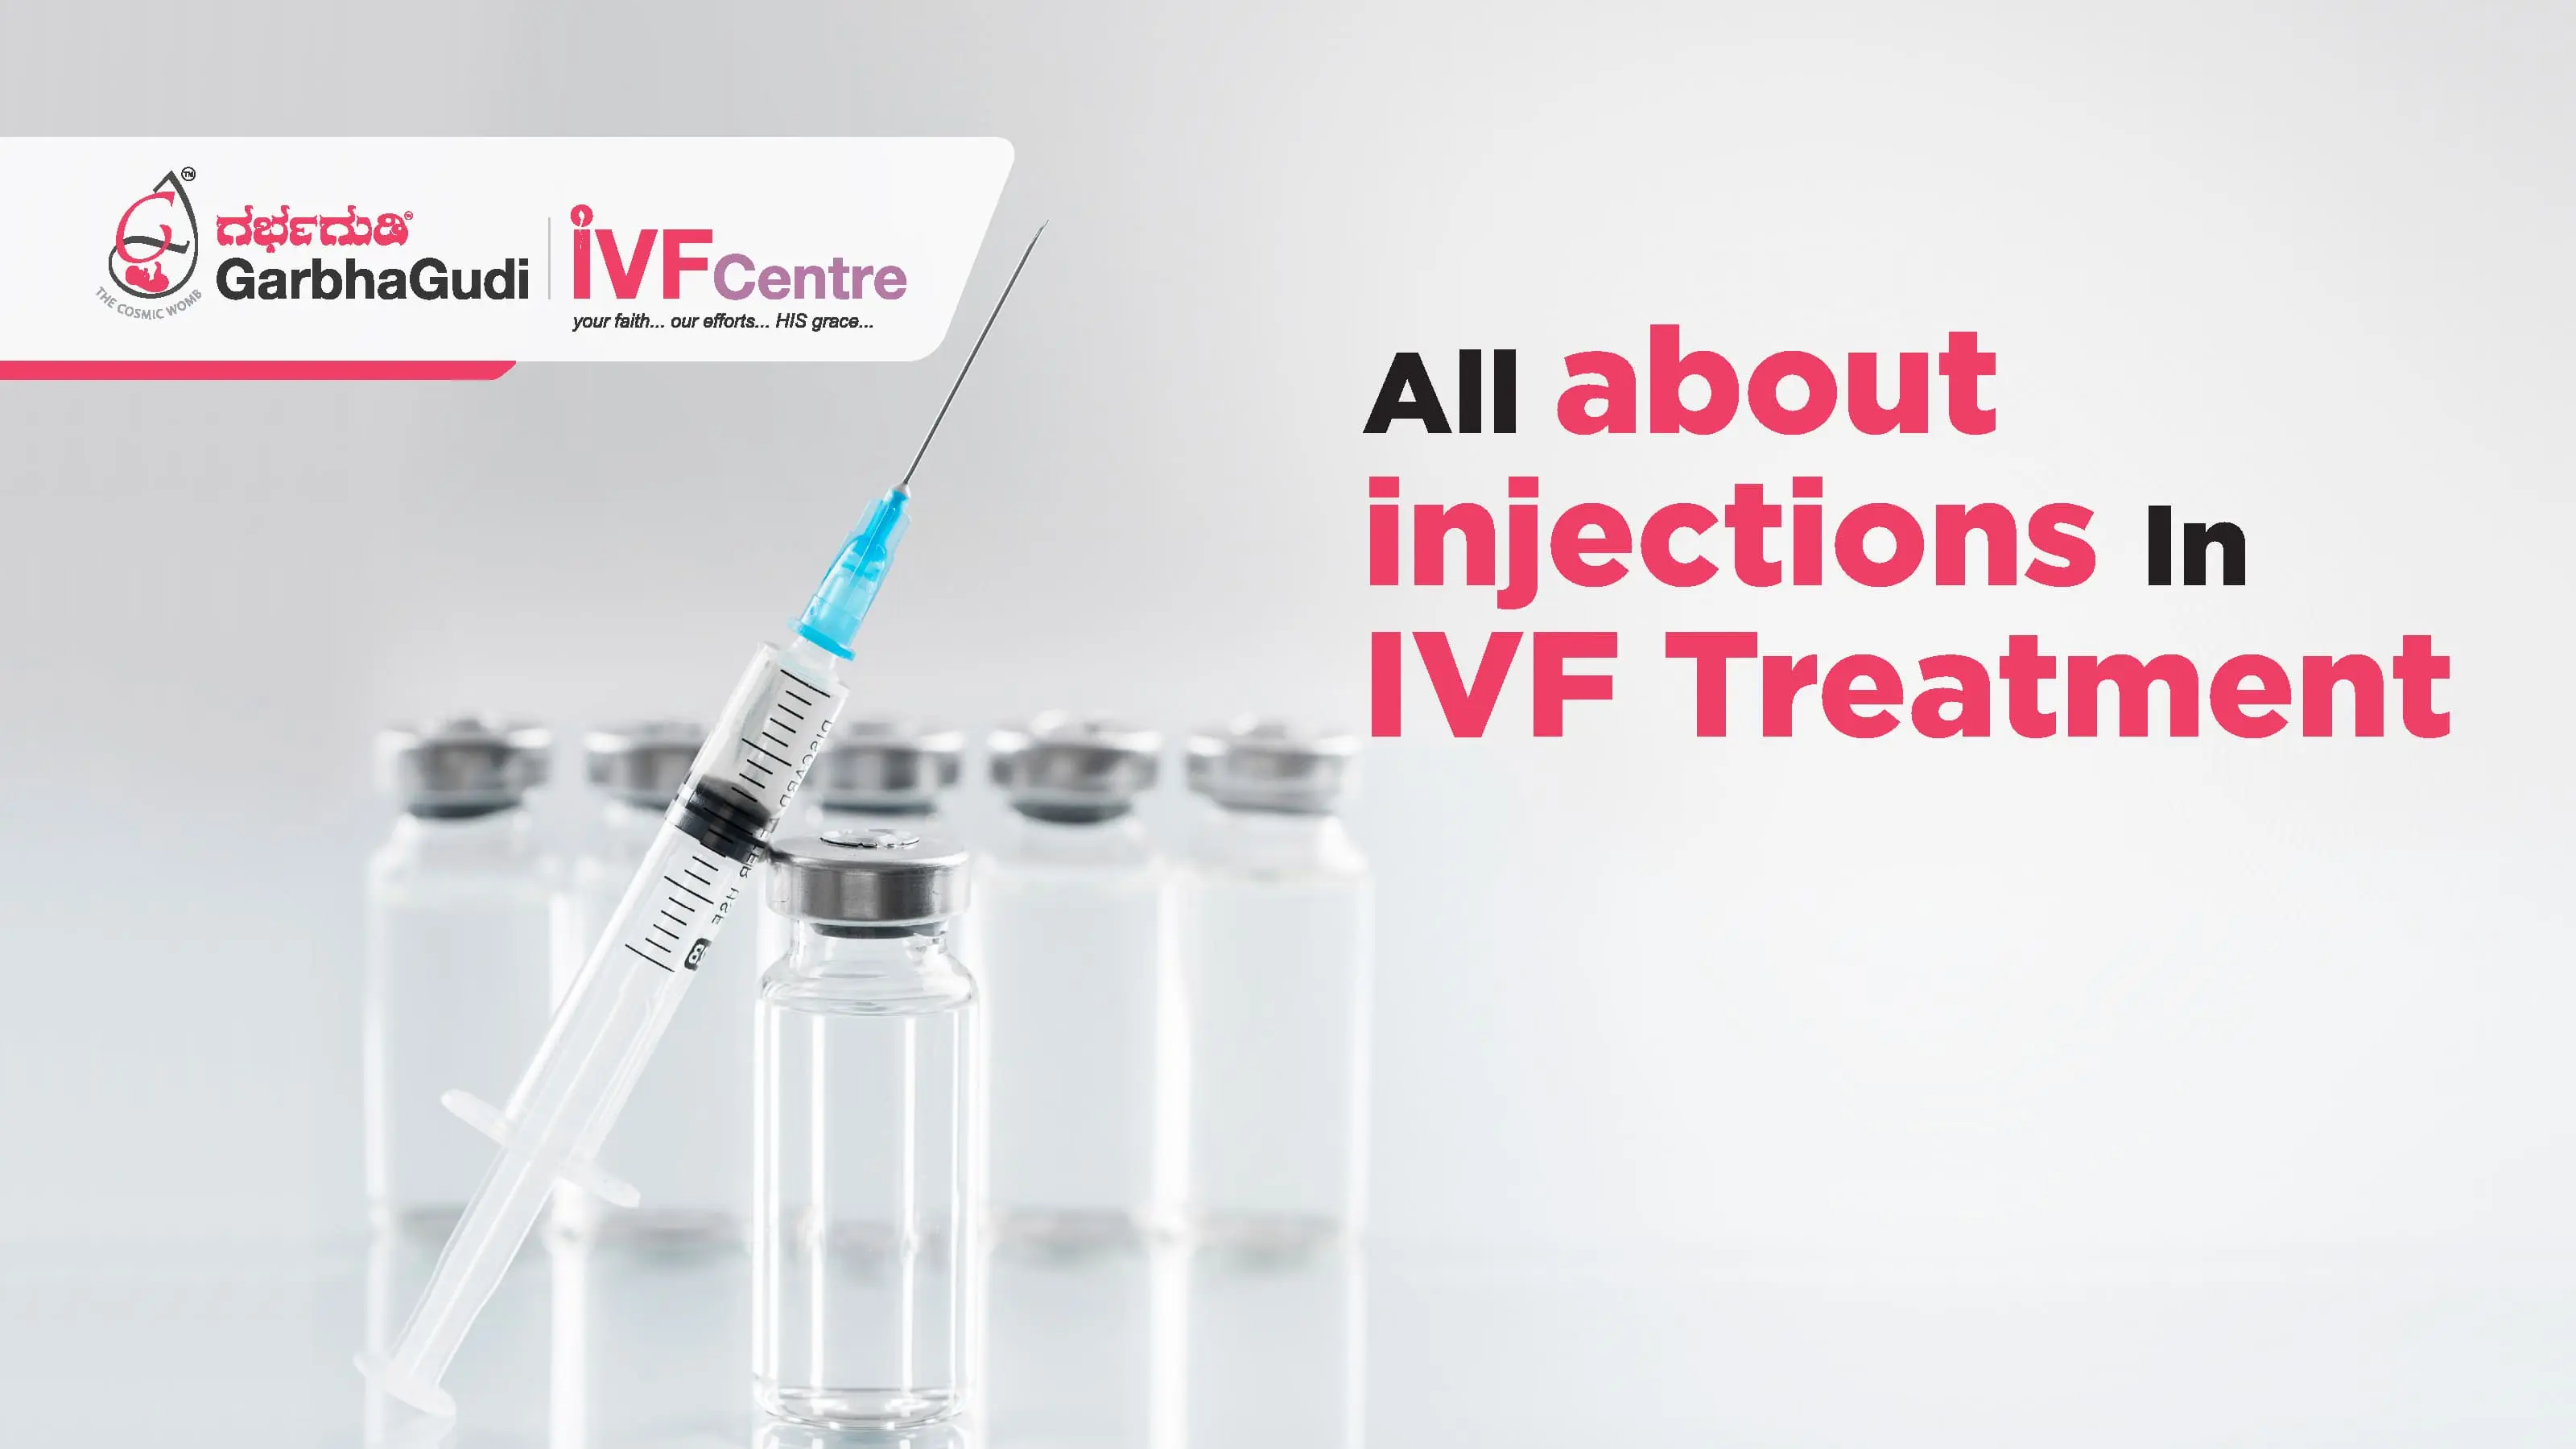 All about injections in IVF Treatment